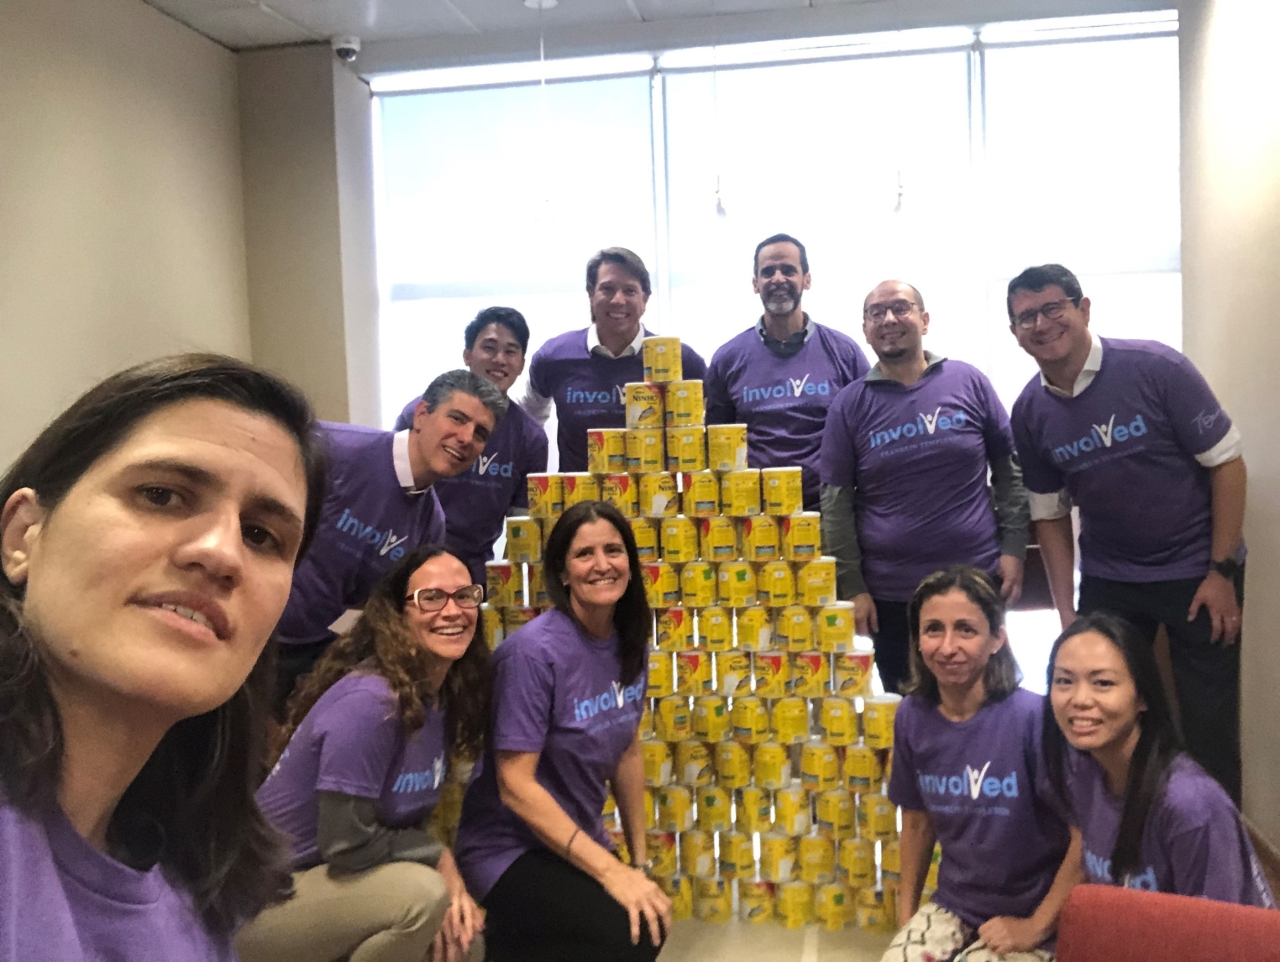 Group wearing "Involved" T-shirt and posing by a pyramid of cans